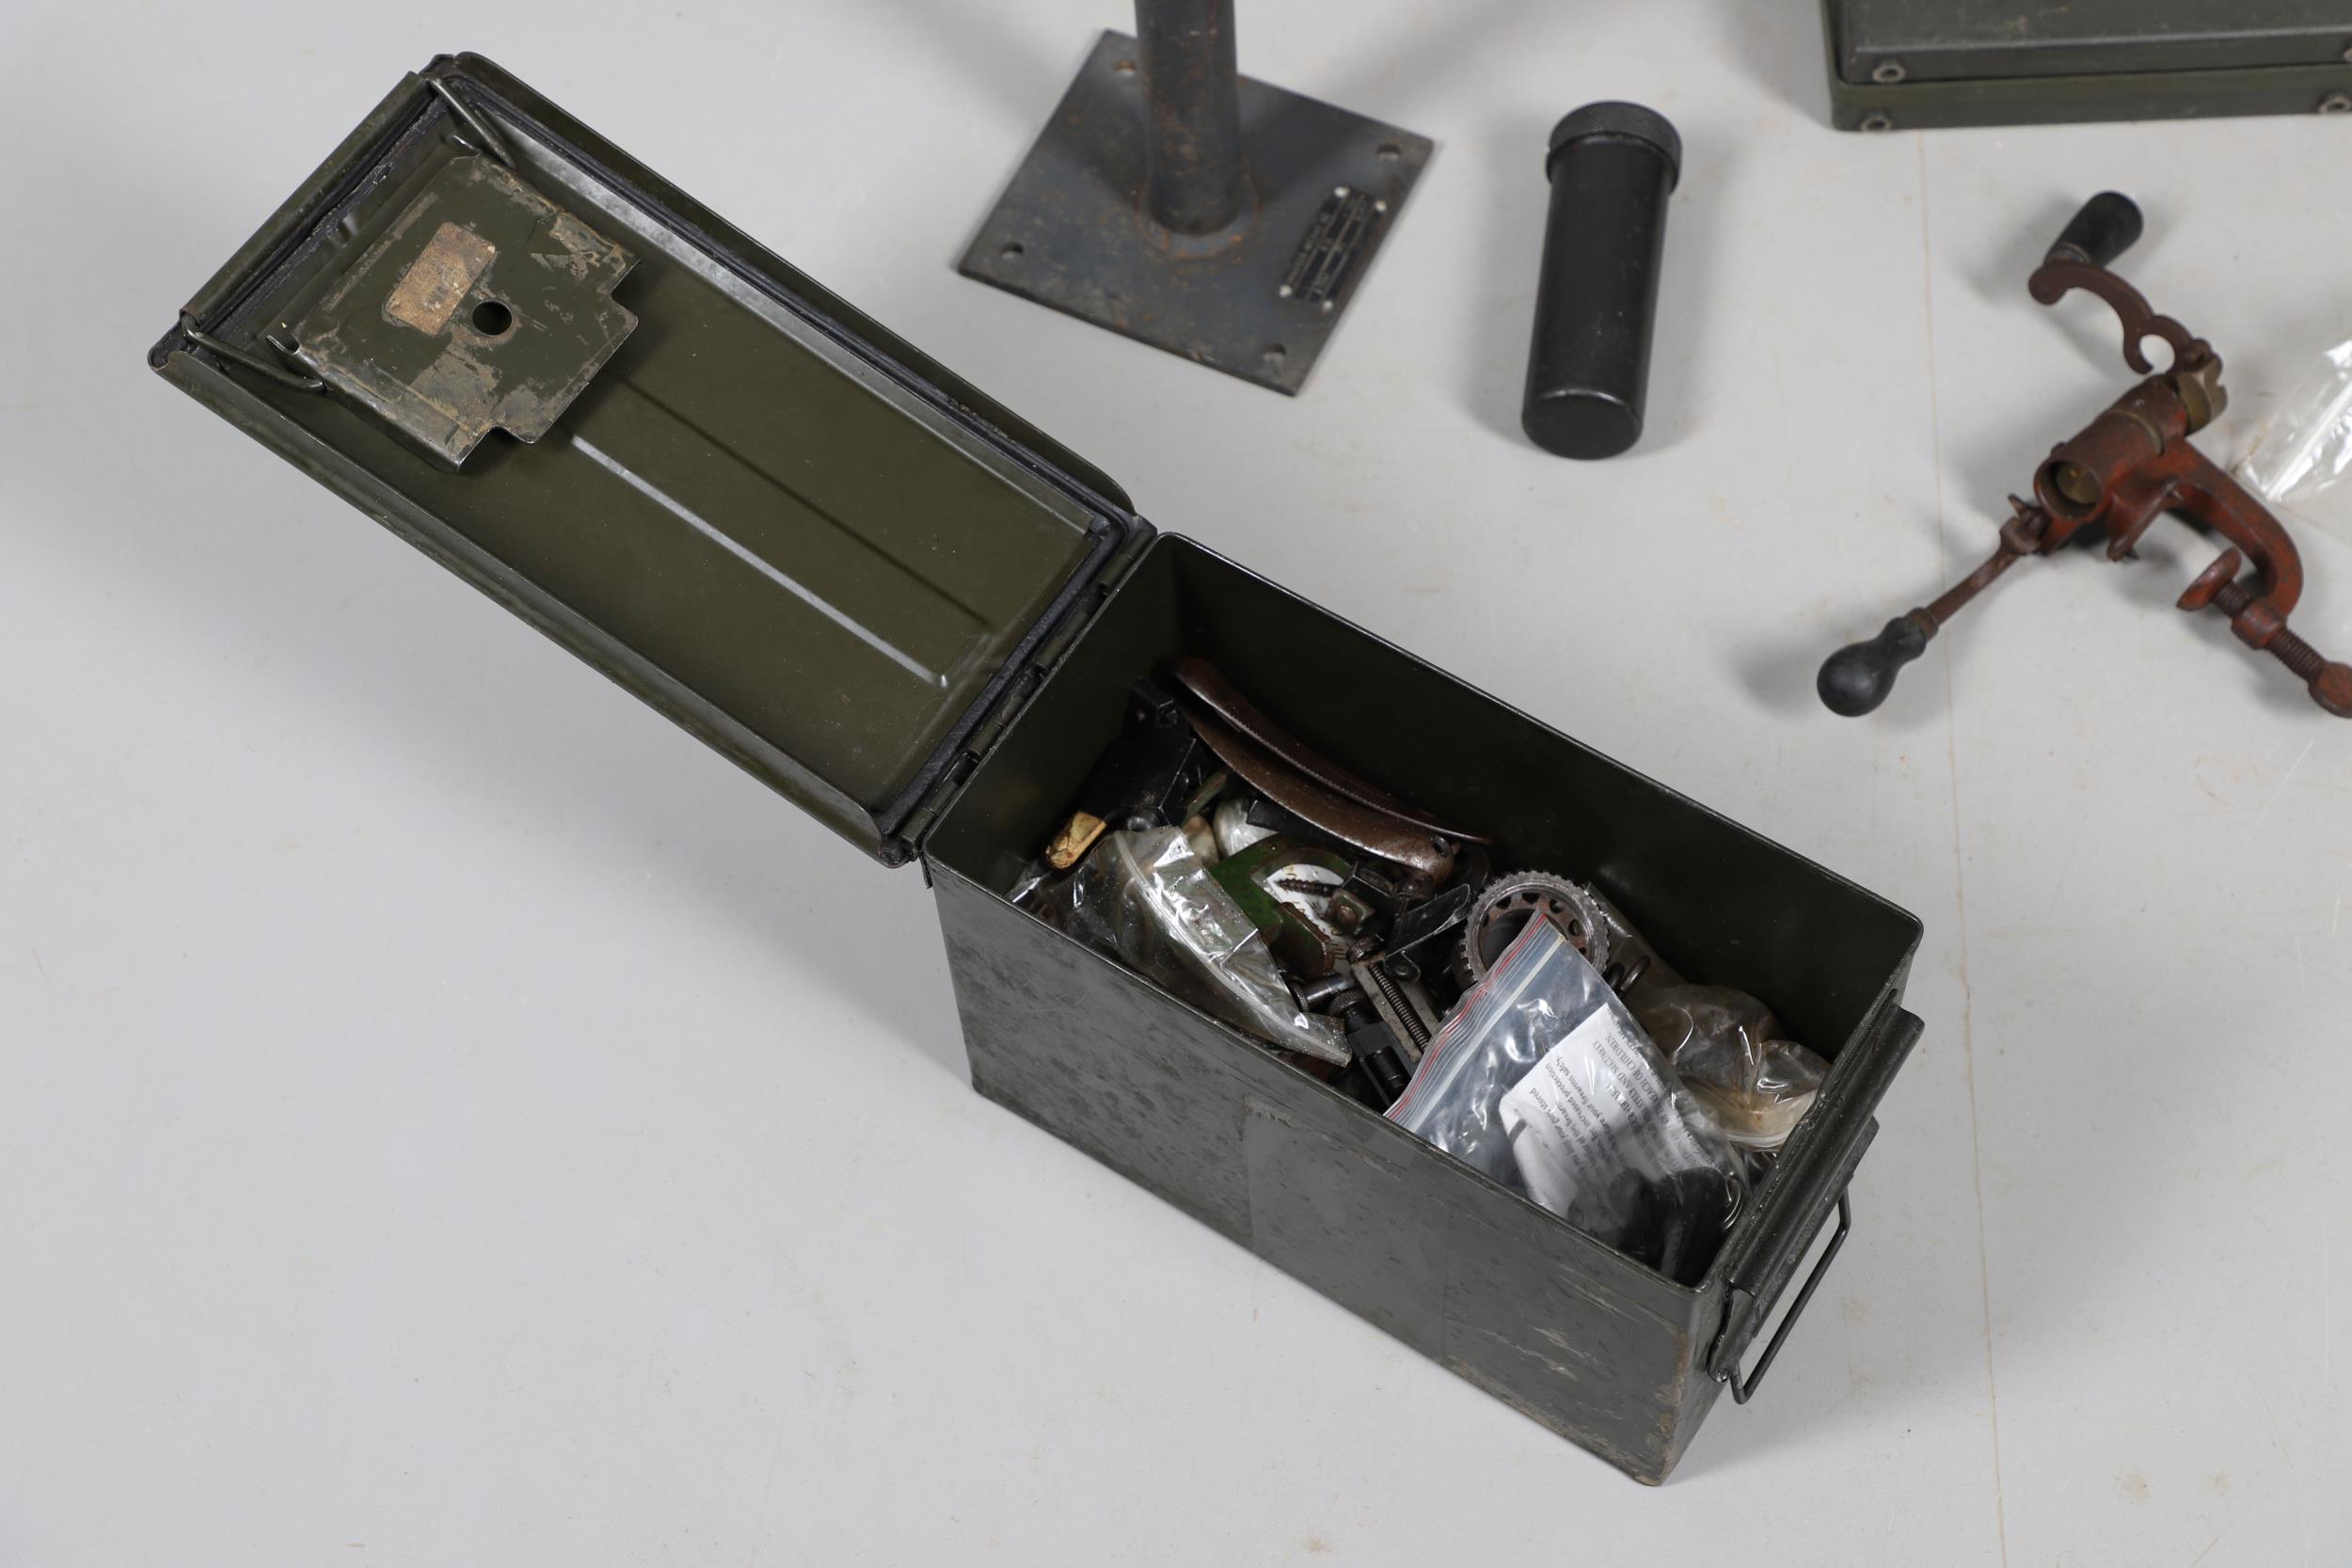 TWO MACHINE GUN BELT LOADING TOOLS AND A COLLECTION OF OTHER ITEMS. - Image 6 of 19